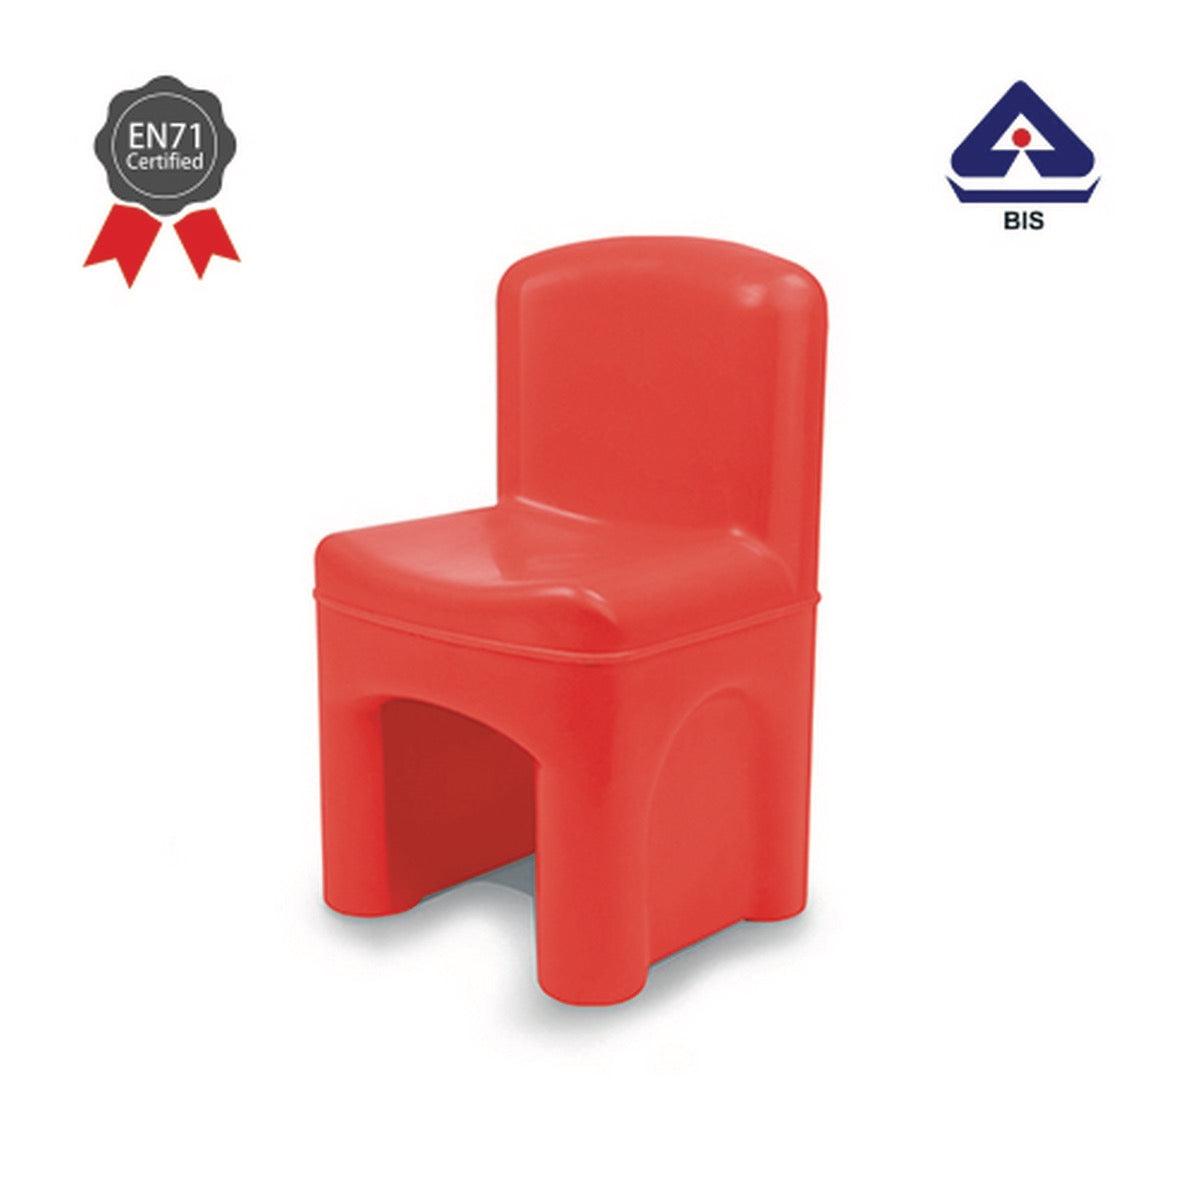 Ok Play Master Seat Chair For Little Kids, Perfect For Home And School, Red, 2 to 4 Years